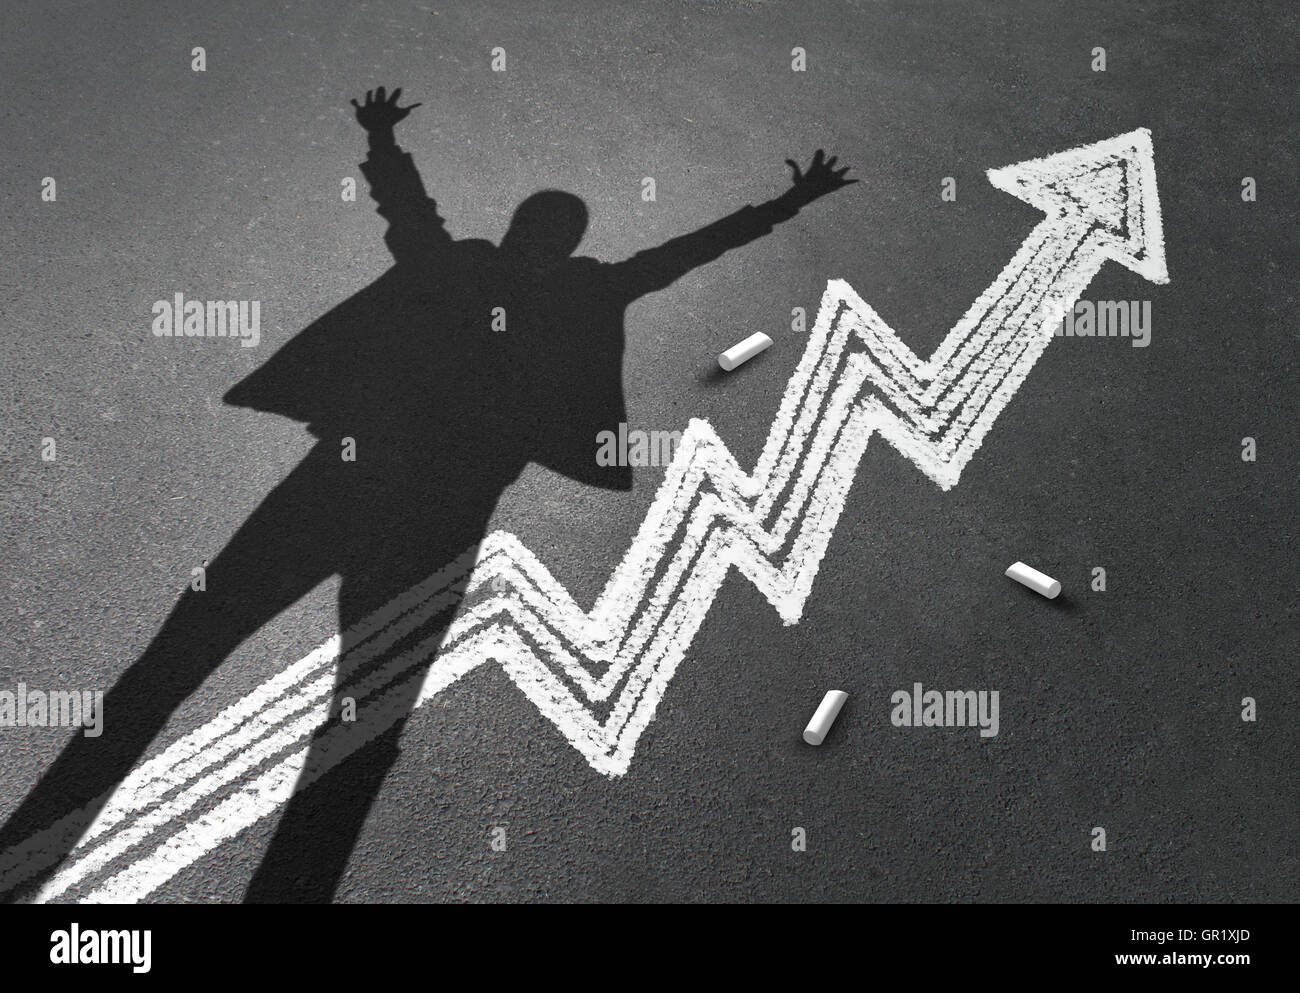 Success in business concept as the cast shadow of a happy businessman with arms raised high celebrating over a wealth and profits chalk drawing of a financial chart in a 3D illustration style. Stock Photo